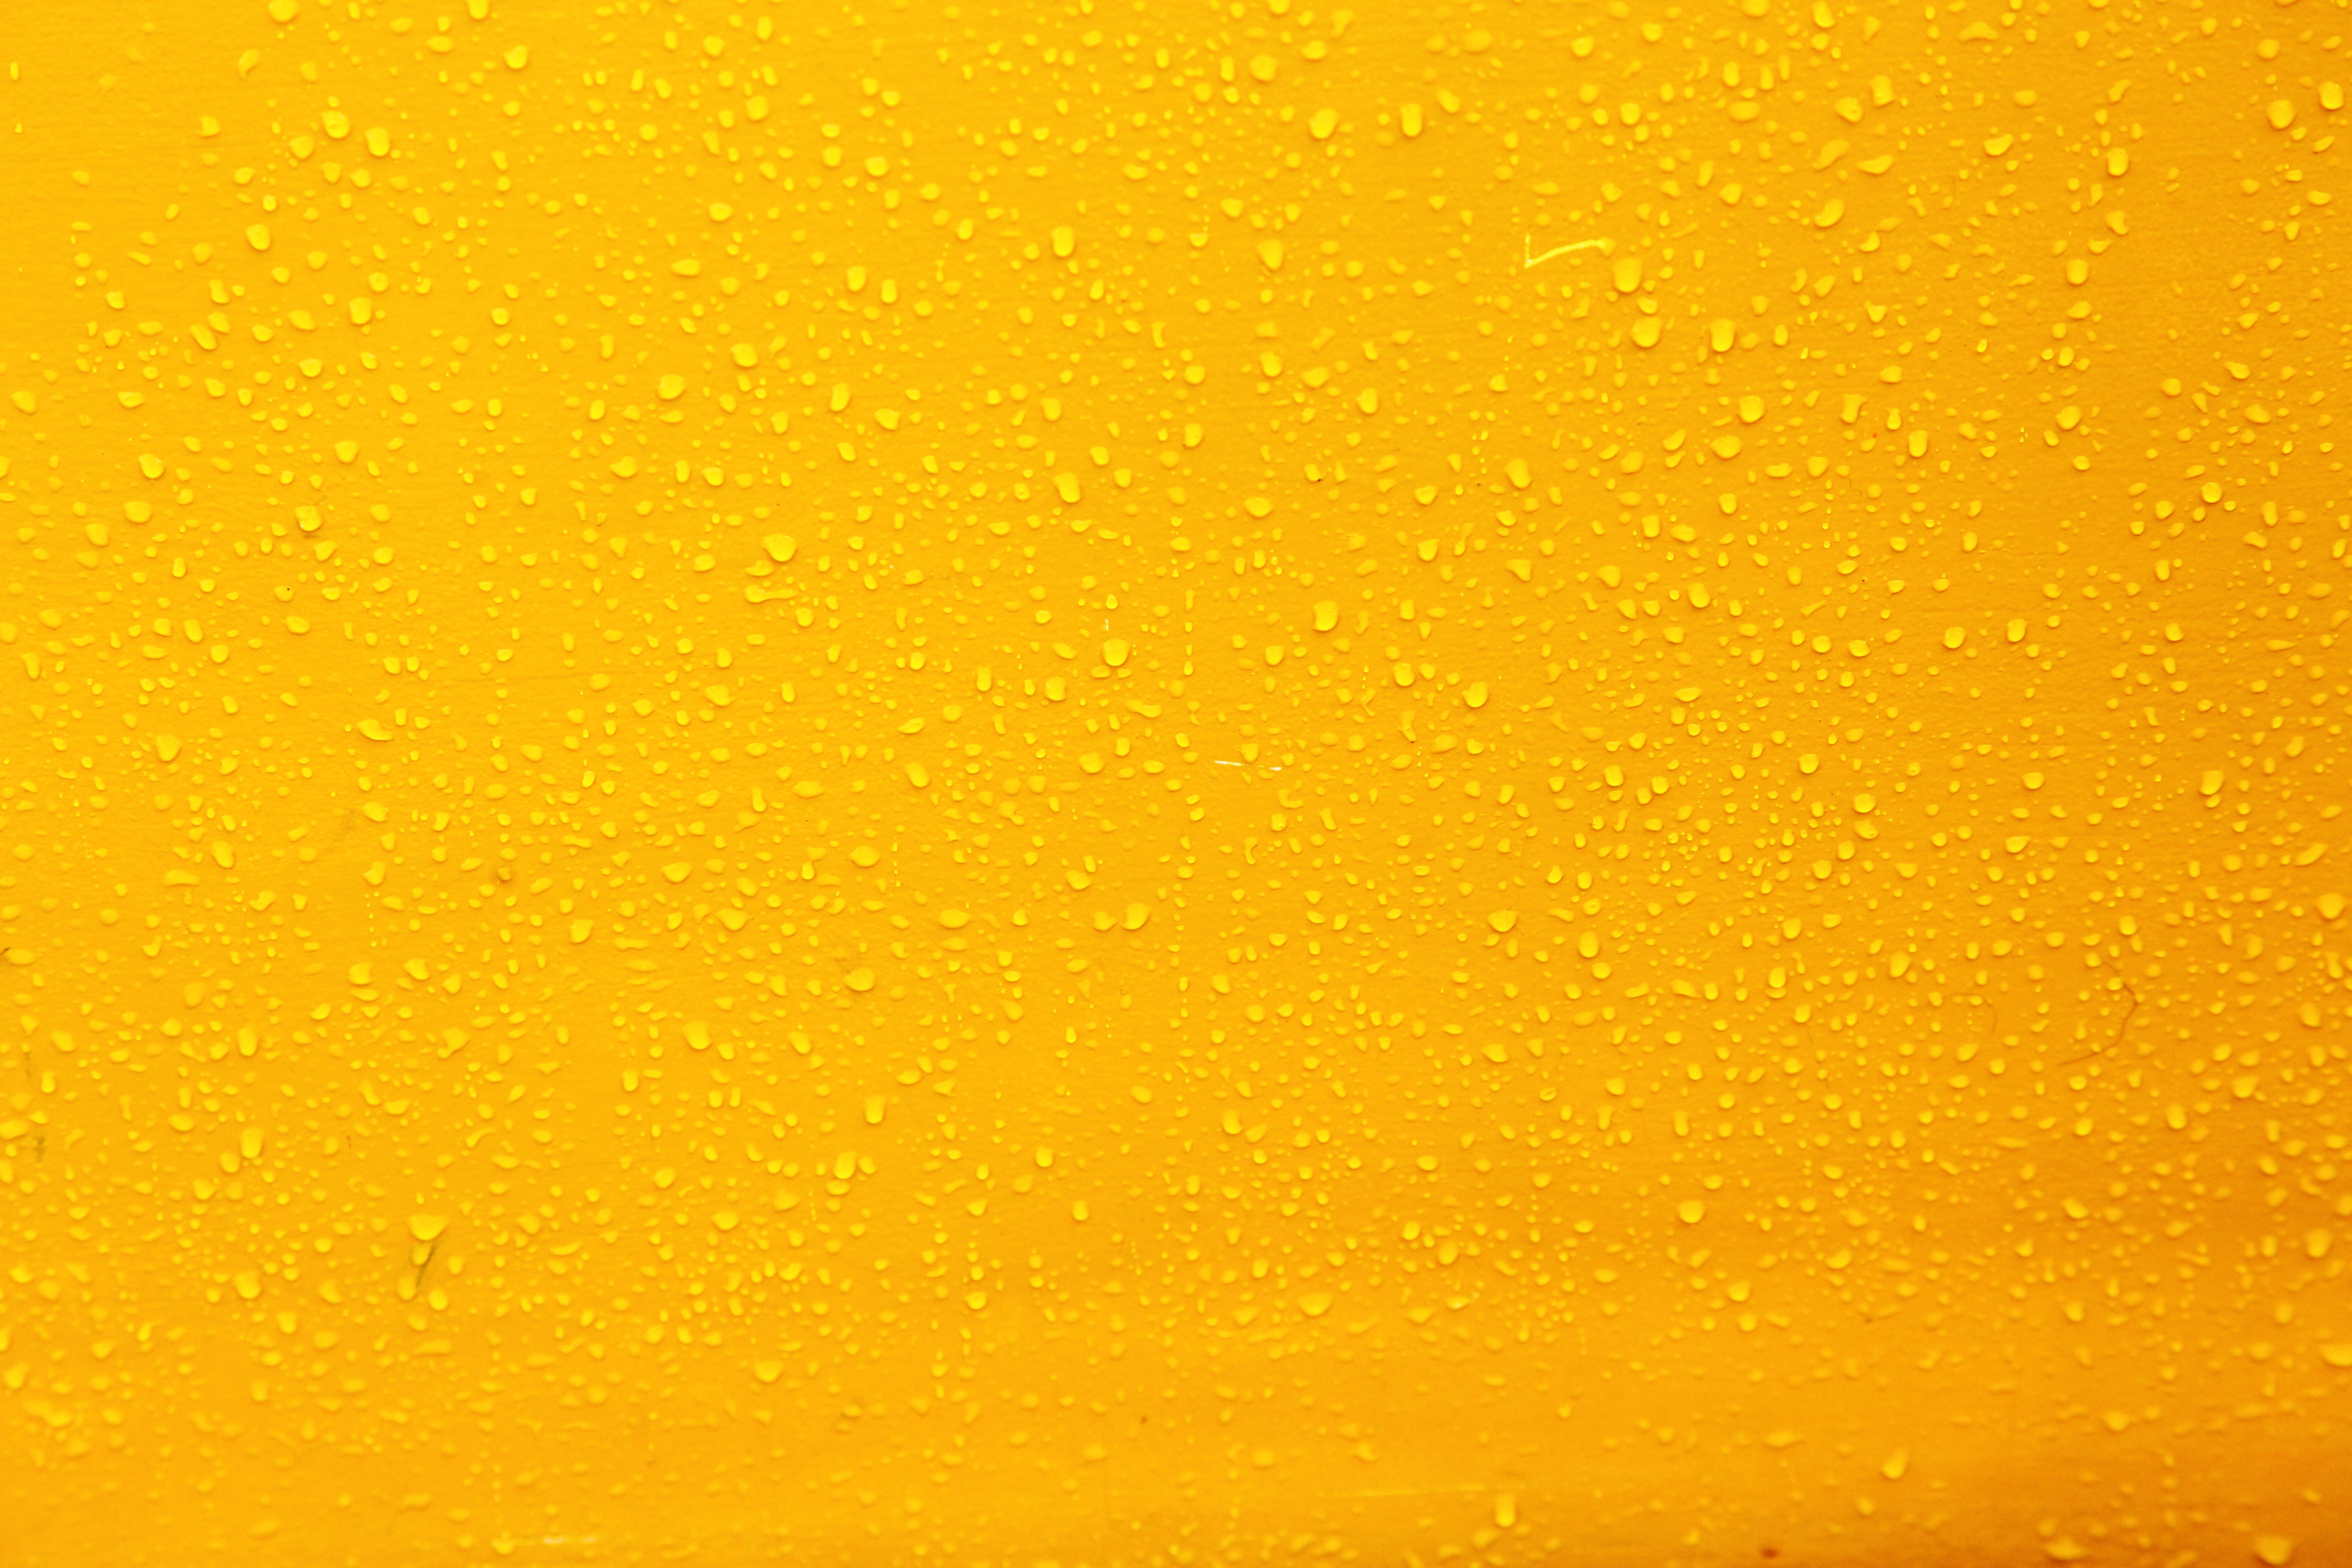 android background, drops, yellow, miscellanea, miscellaneous